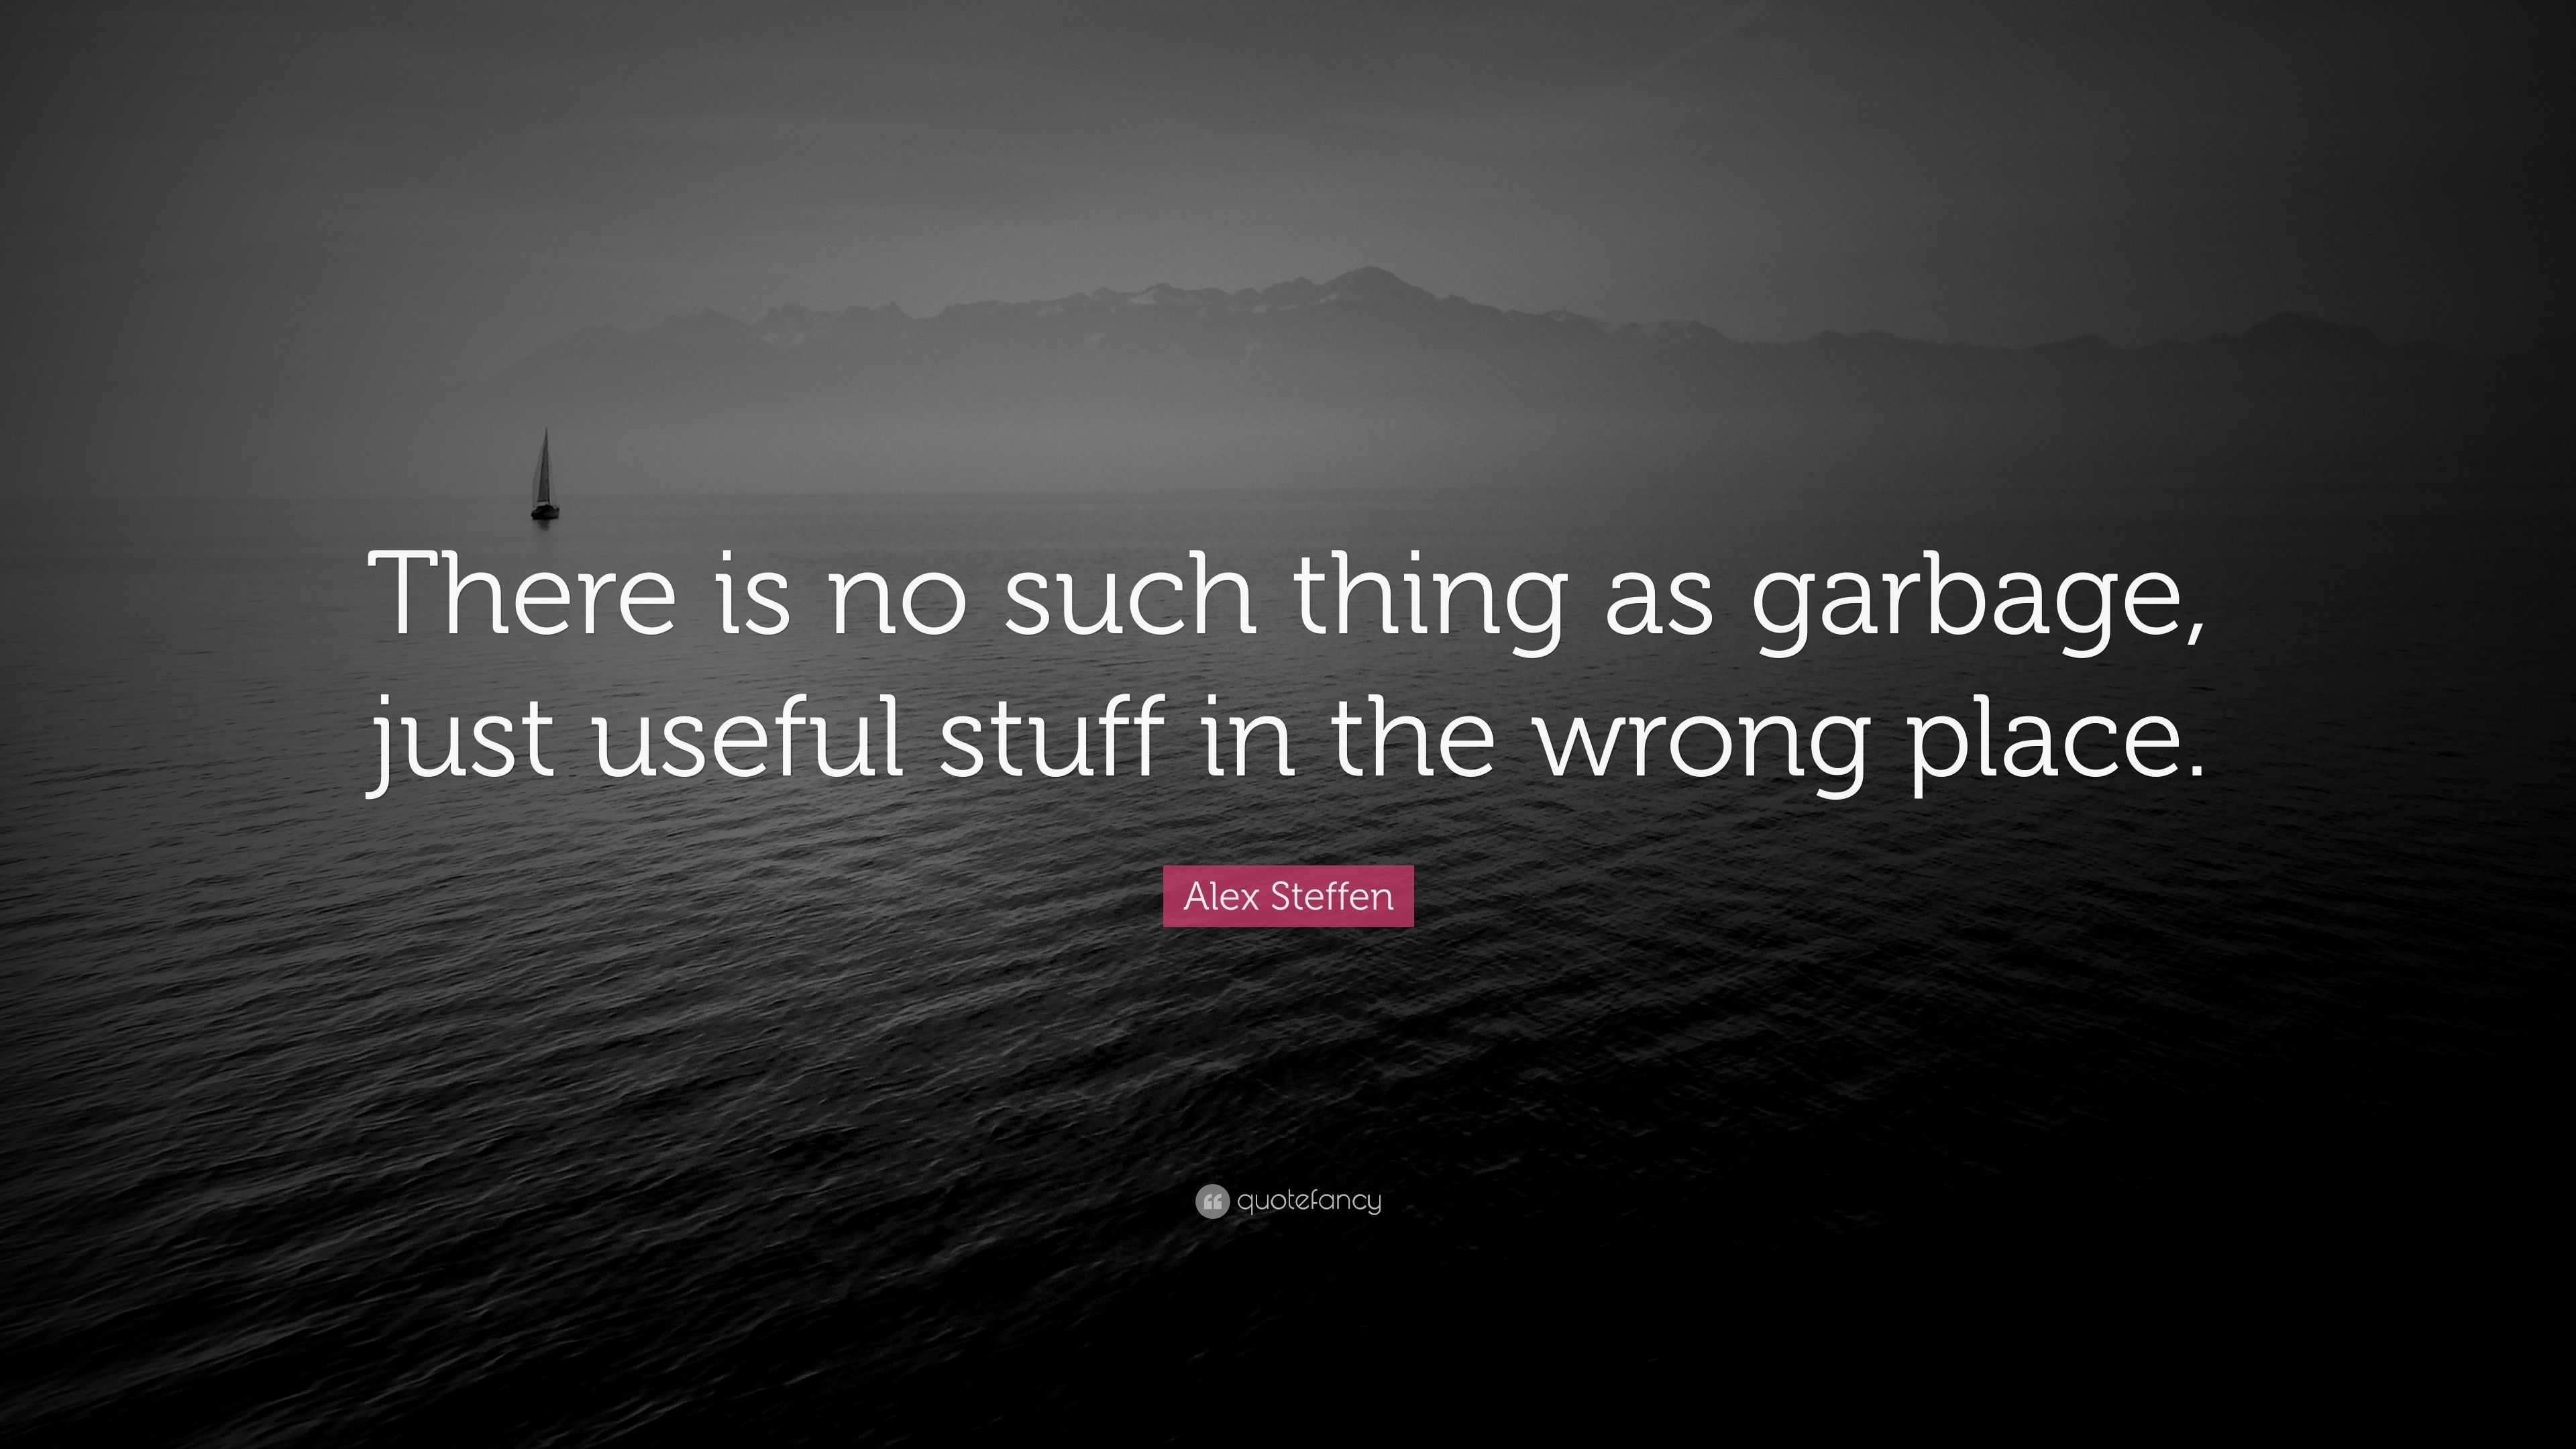 https://quotefancy.com/media/wallpaper/3840x2160/3382632-Alex-Steffen-Quote-There-is-no-such-thing-as-garbage-just-useful.jpg